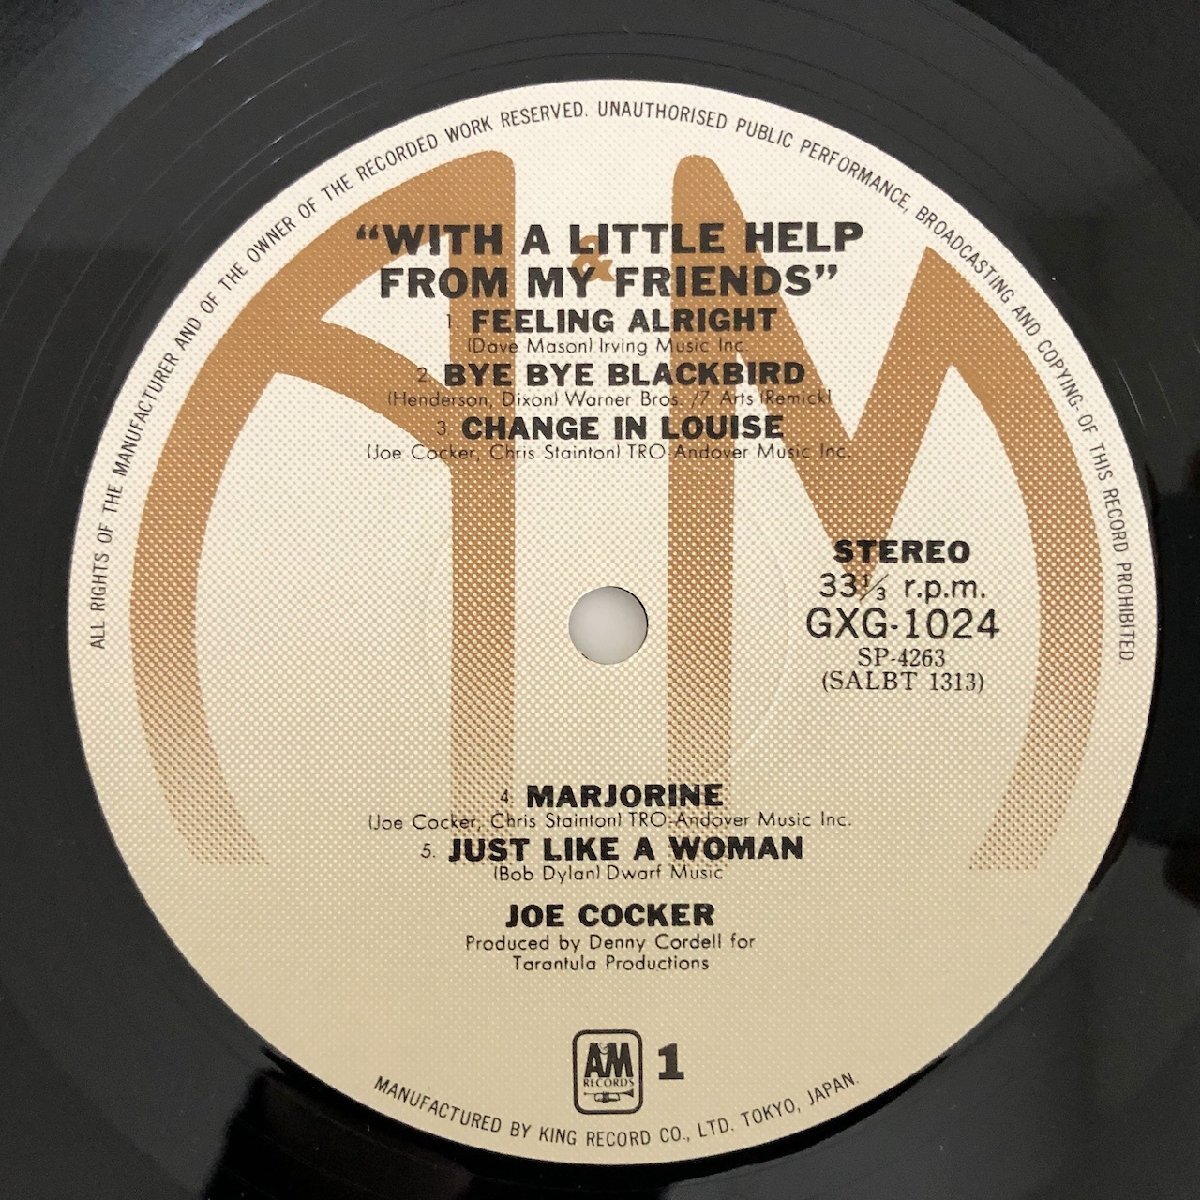 LP/ JOE COCKER / WITH A LITTLE HELP FROM MY FRIENDS / ジョー・コッカ― / 国内盤 ライナー A&M GXG-1024 40416の画像4